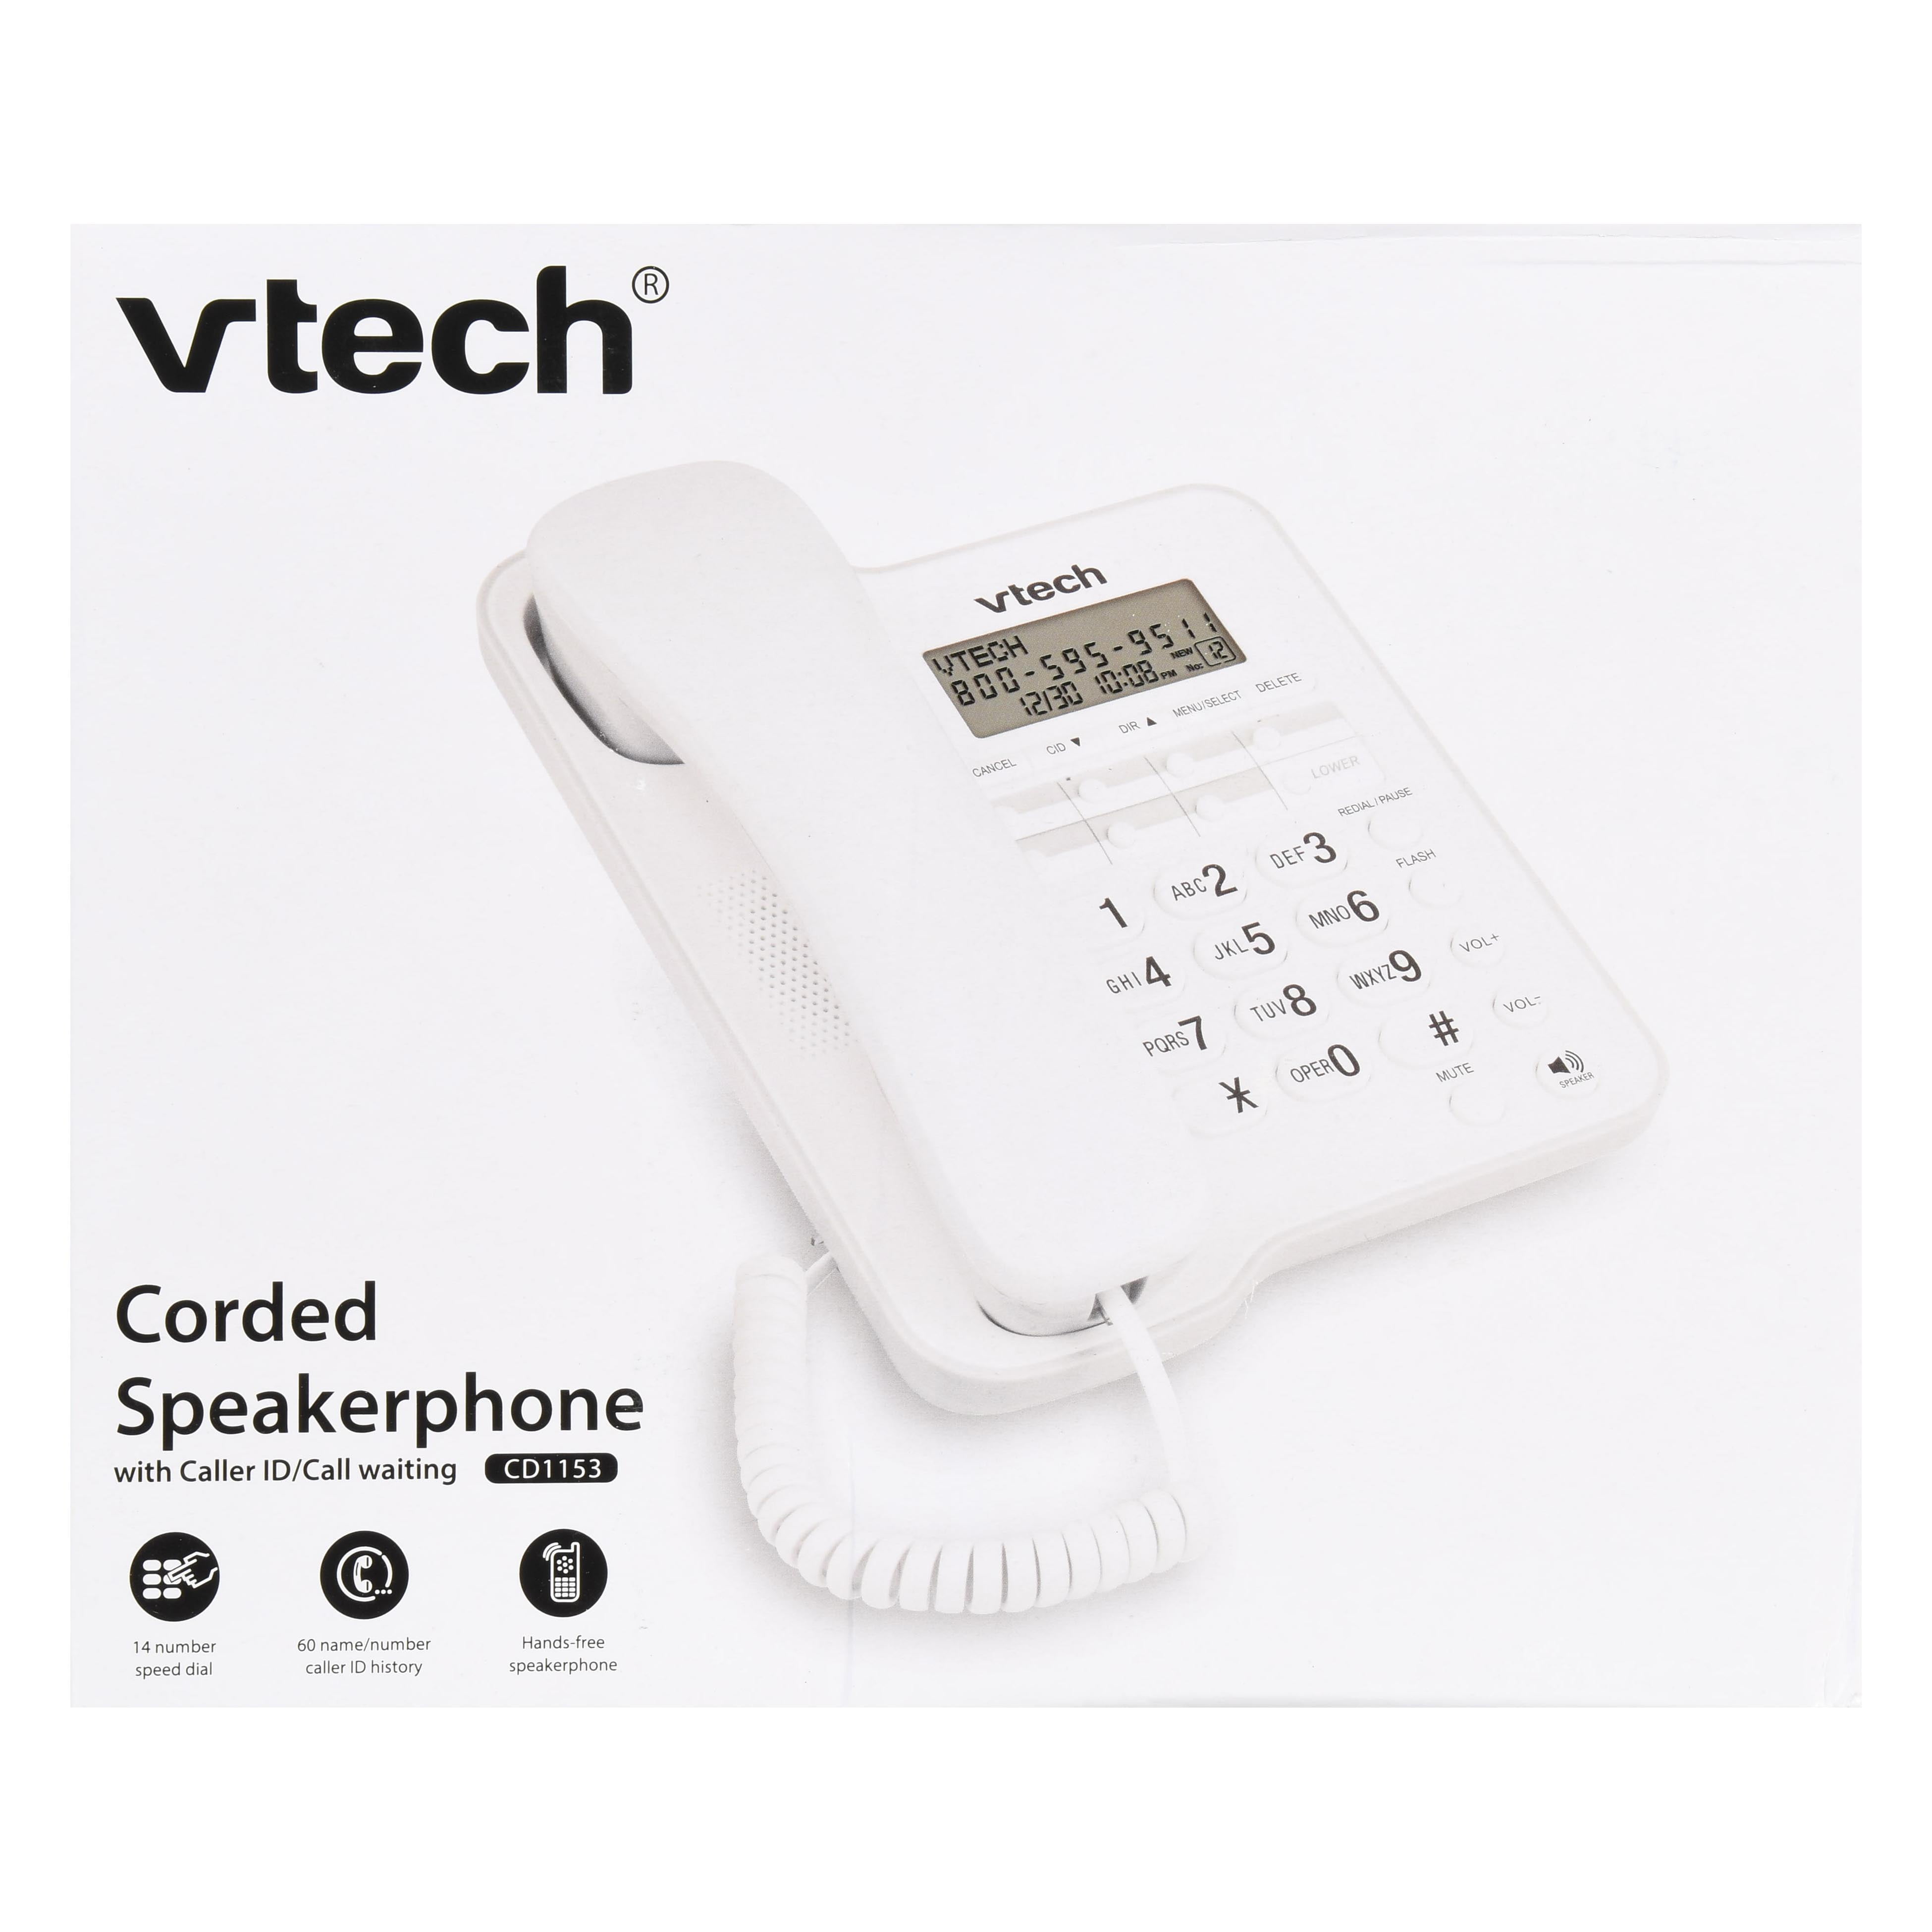 Vtech CD1153 Corded Speaker Telephone with Caller ID/ Call Waiting ™